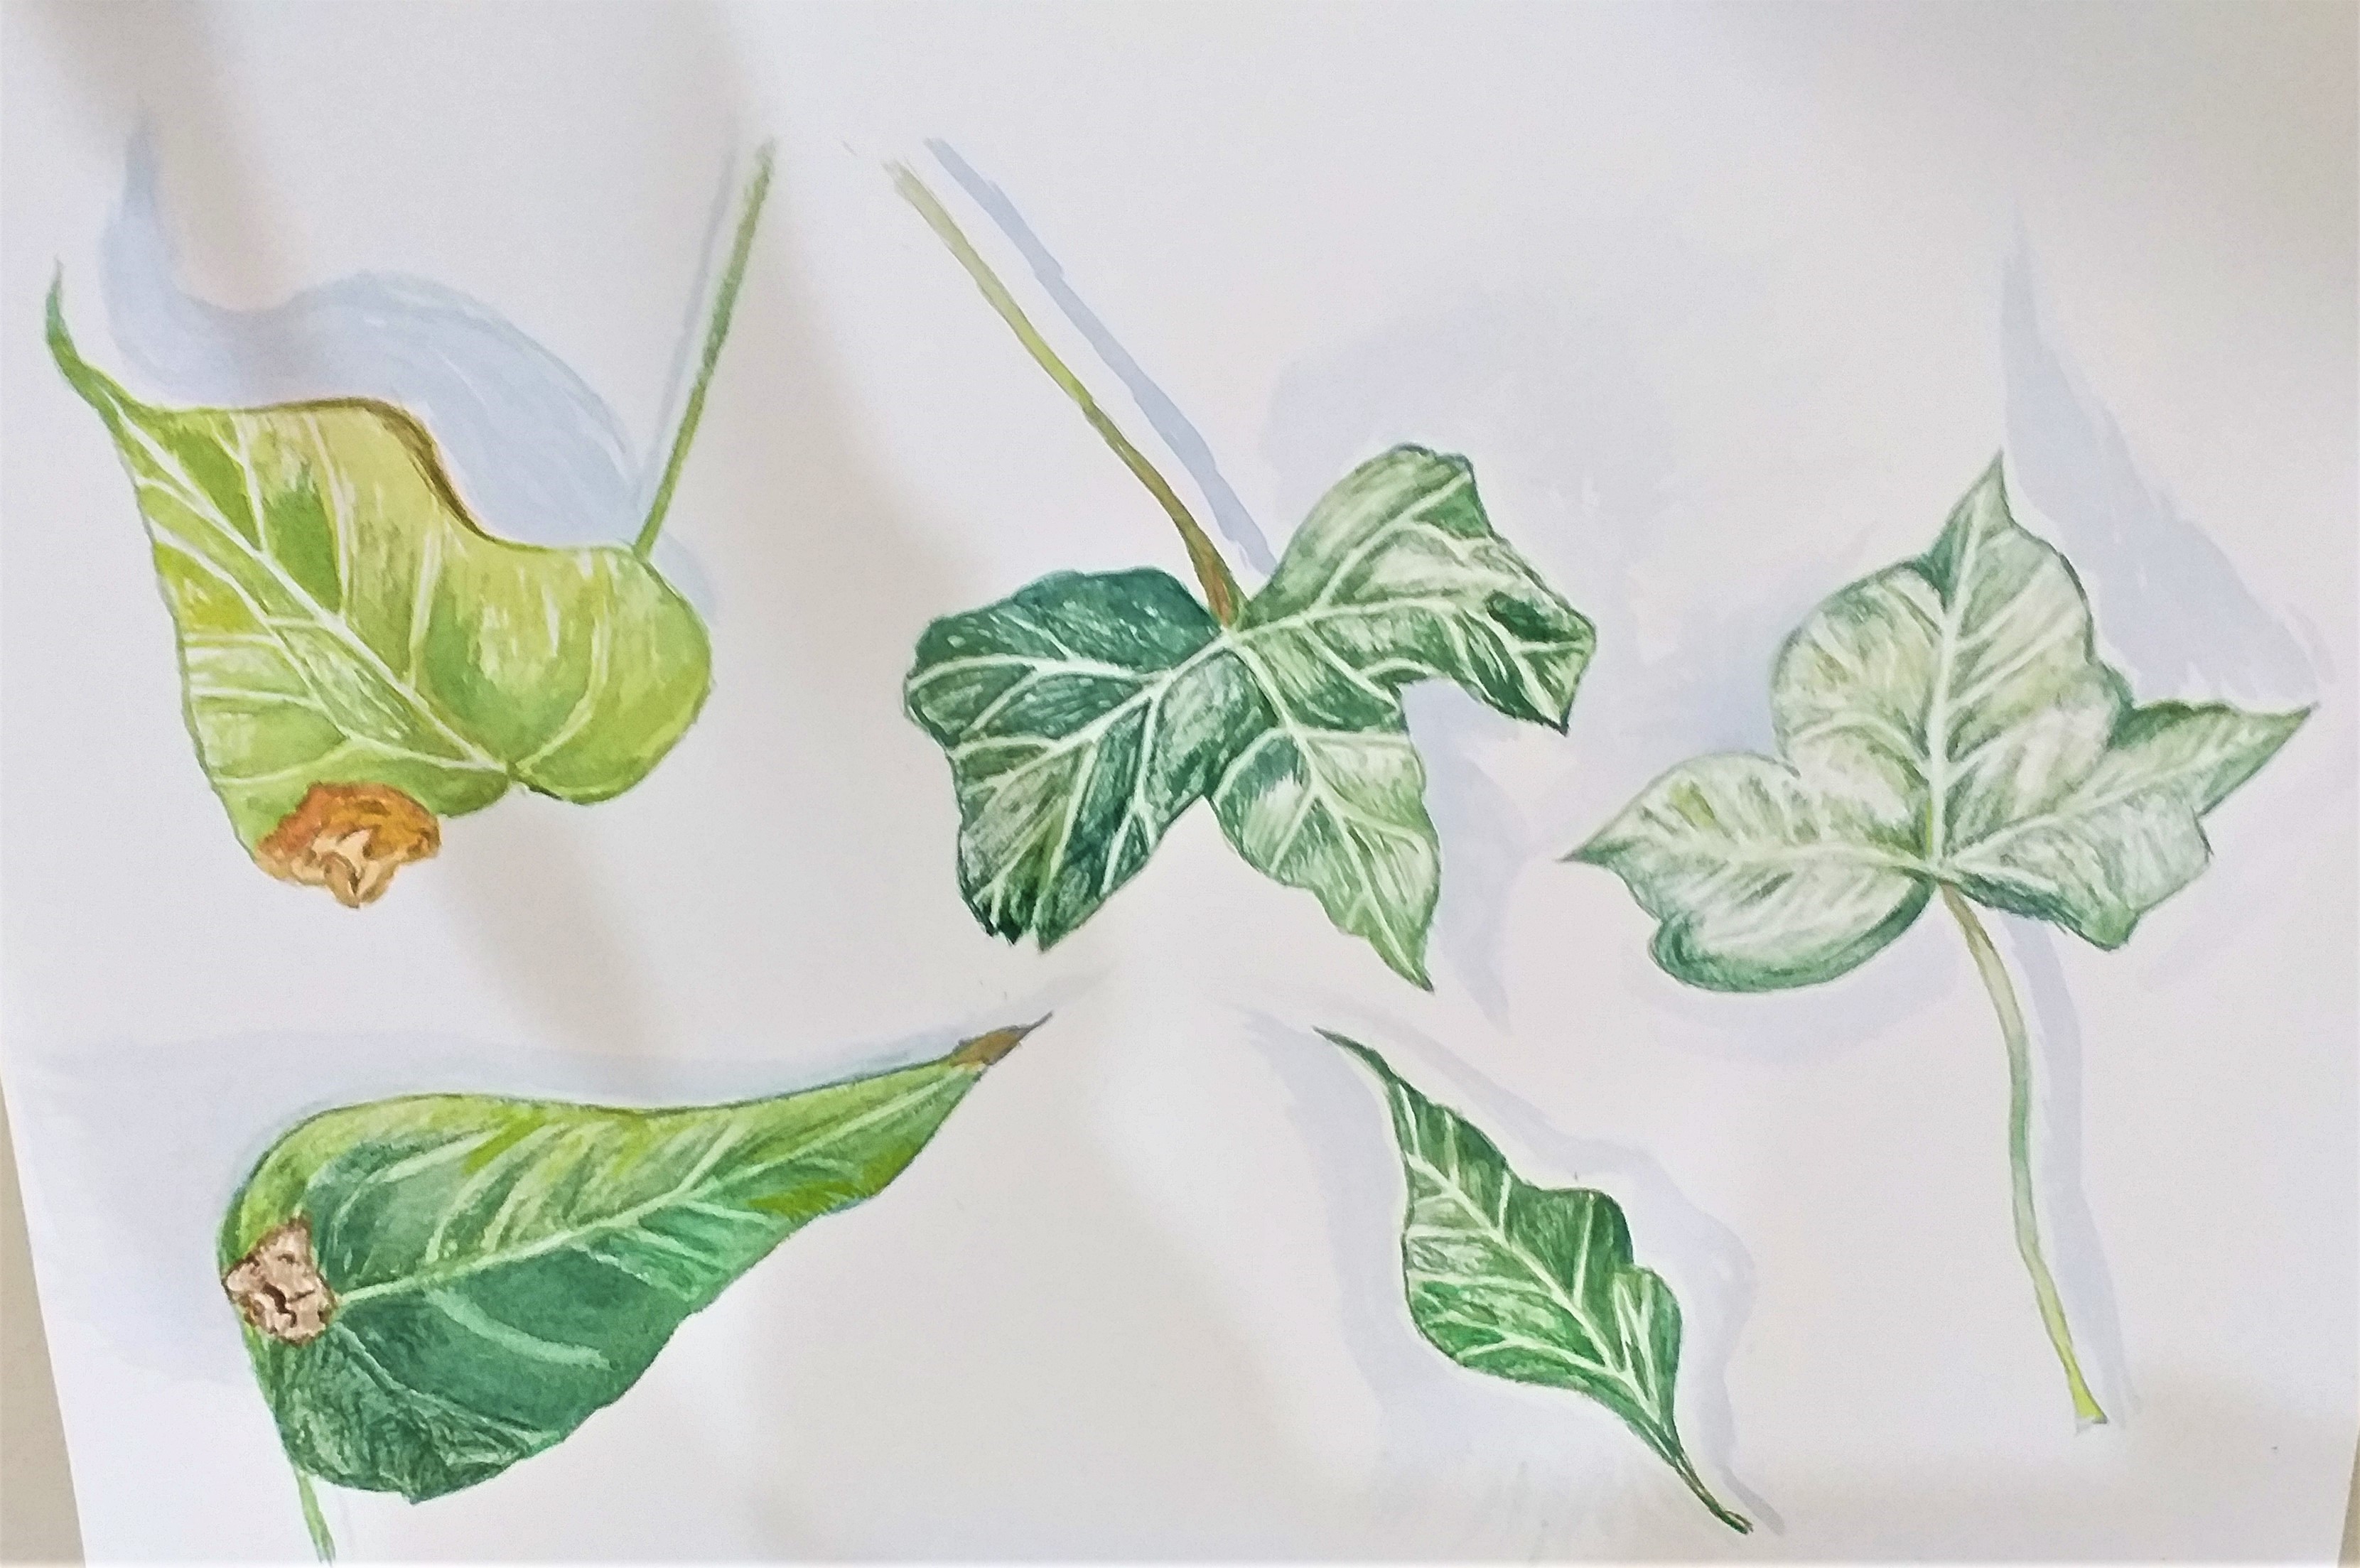 Deb's watercolour study of leaves created at Magic Wool Art and Craft Studio in Kidderminster.